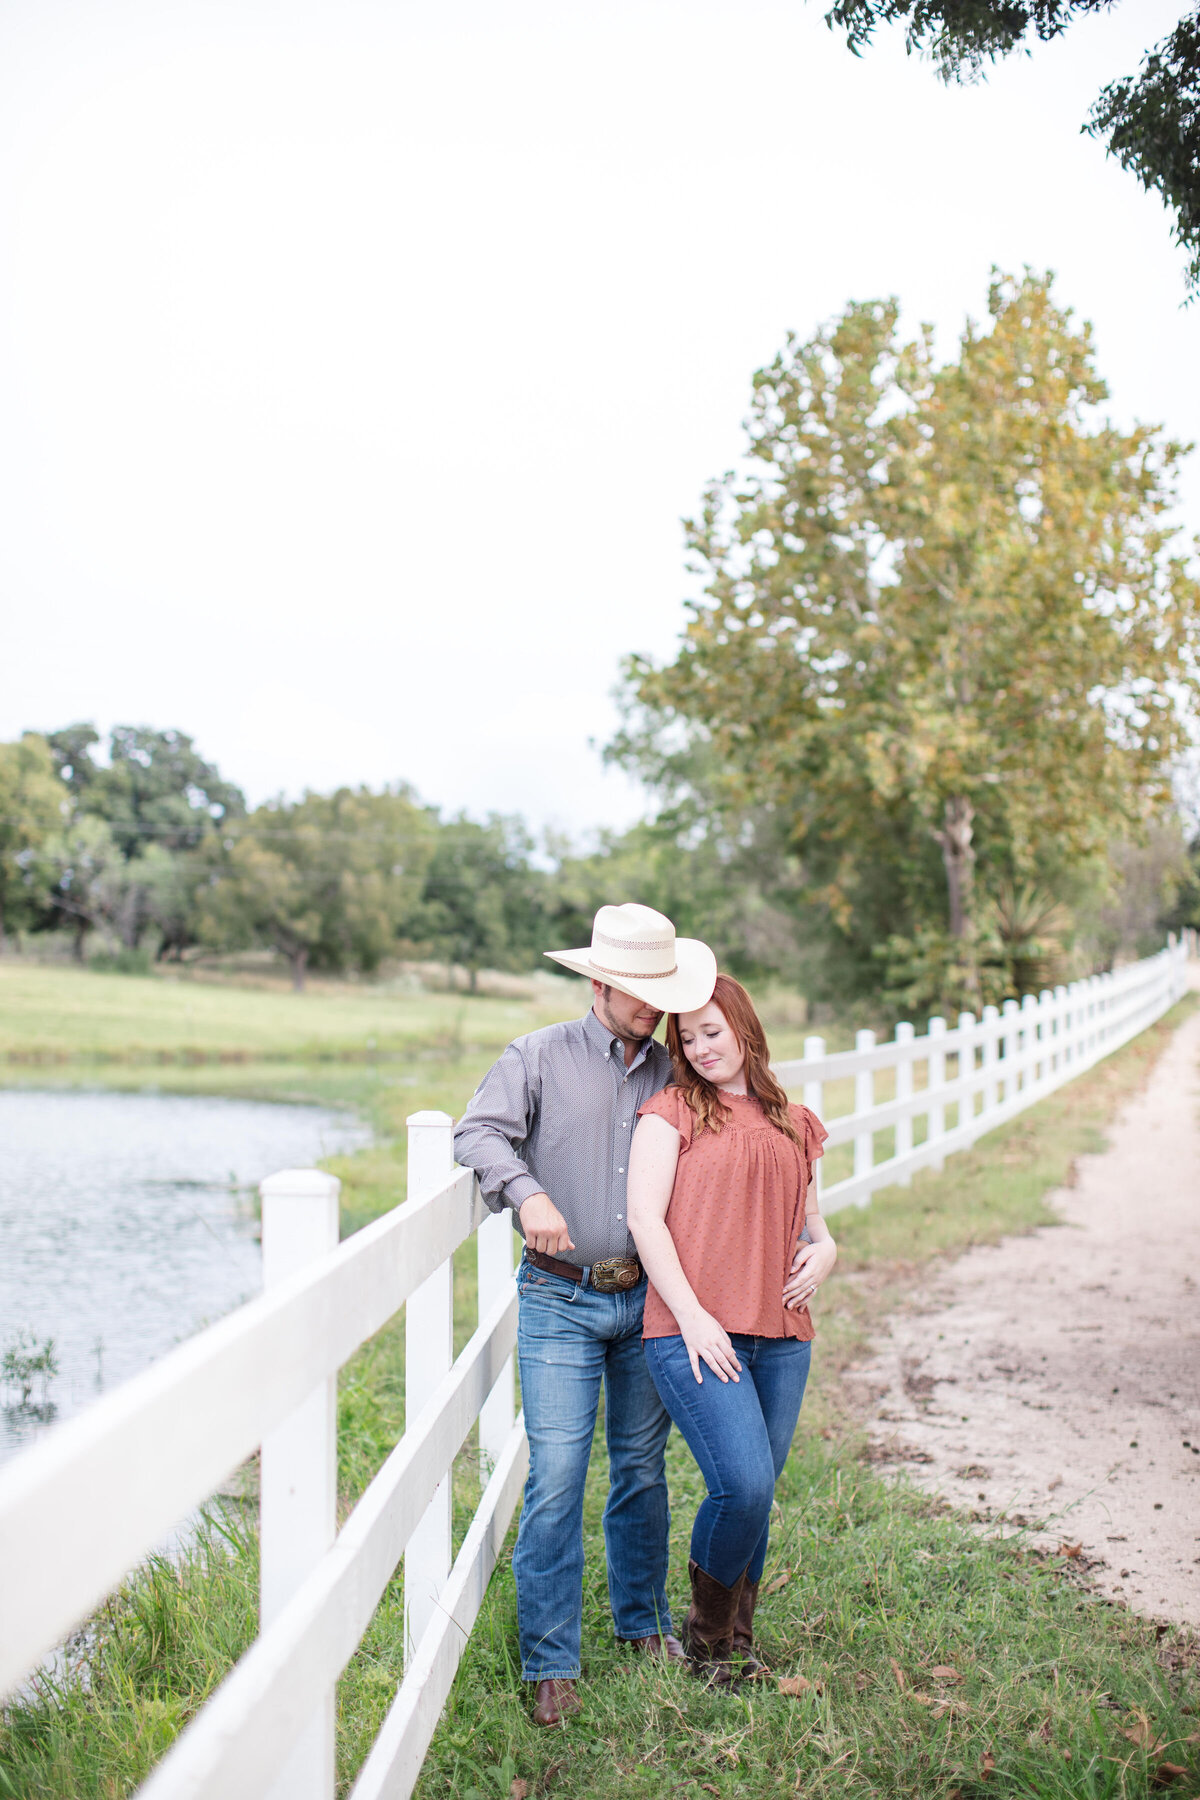 engagement session at Boerne wedding venue with white fence cowboy hat and boots by Firefly Photography